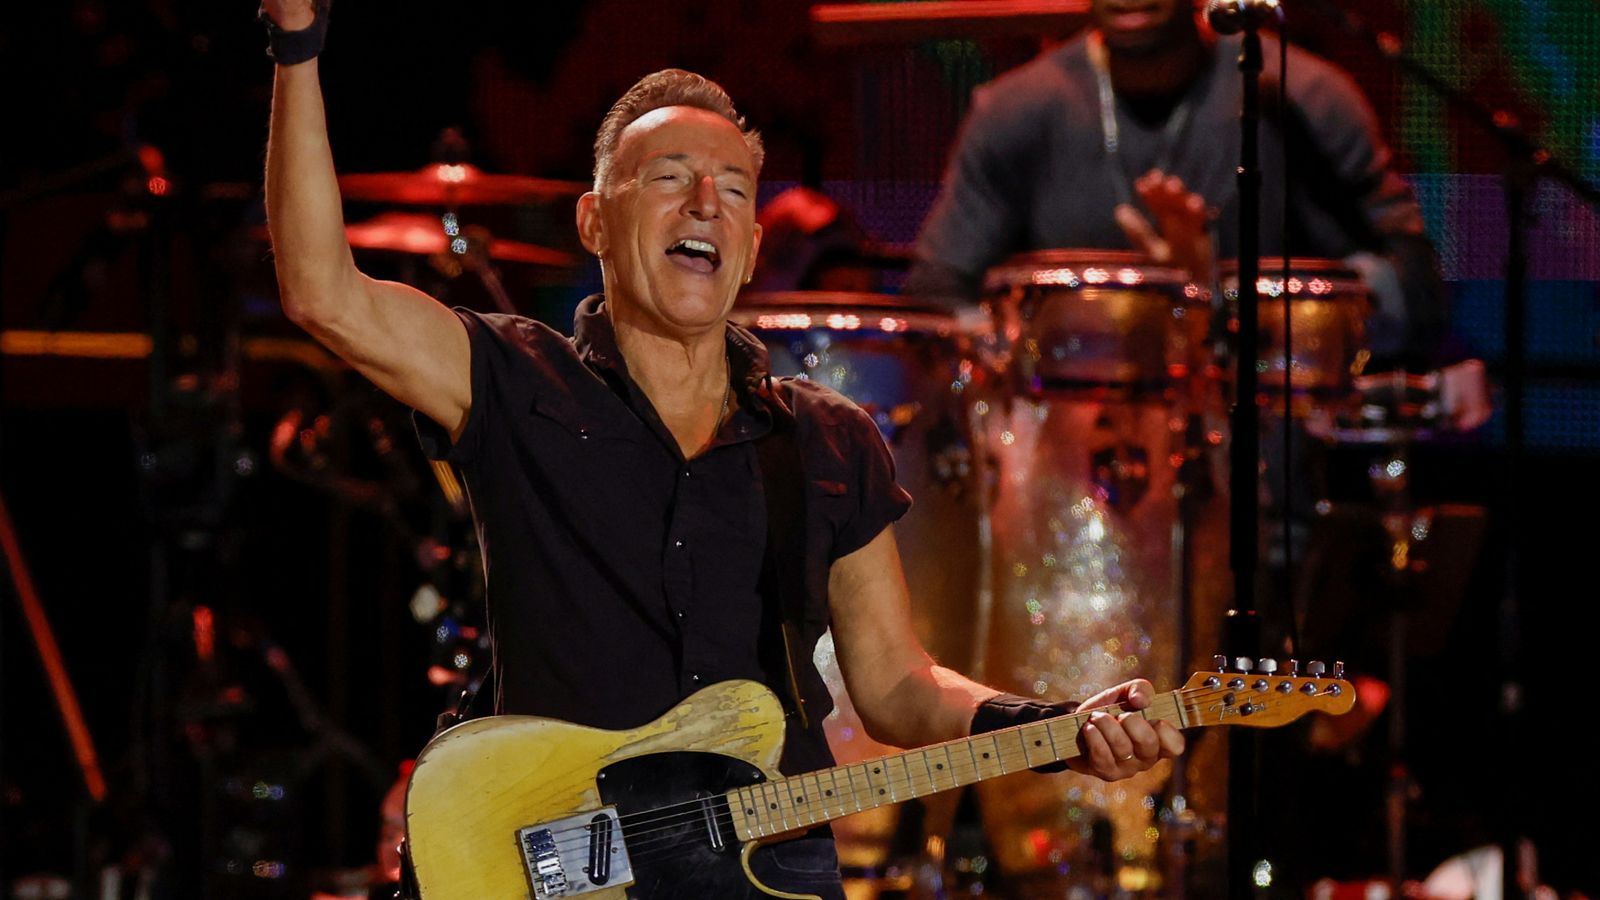 Bruce Springsteen postpones September shows with E Street Band after falling ill with peptic ulcer | Ents & Arts News